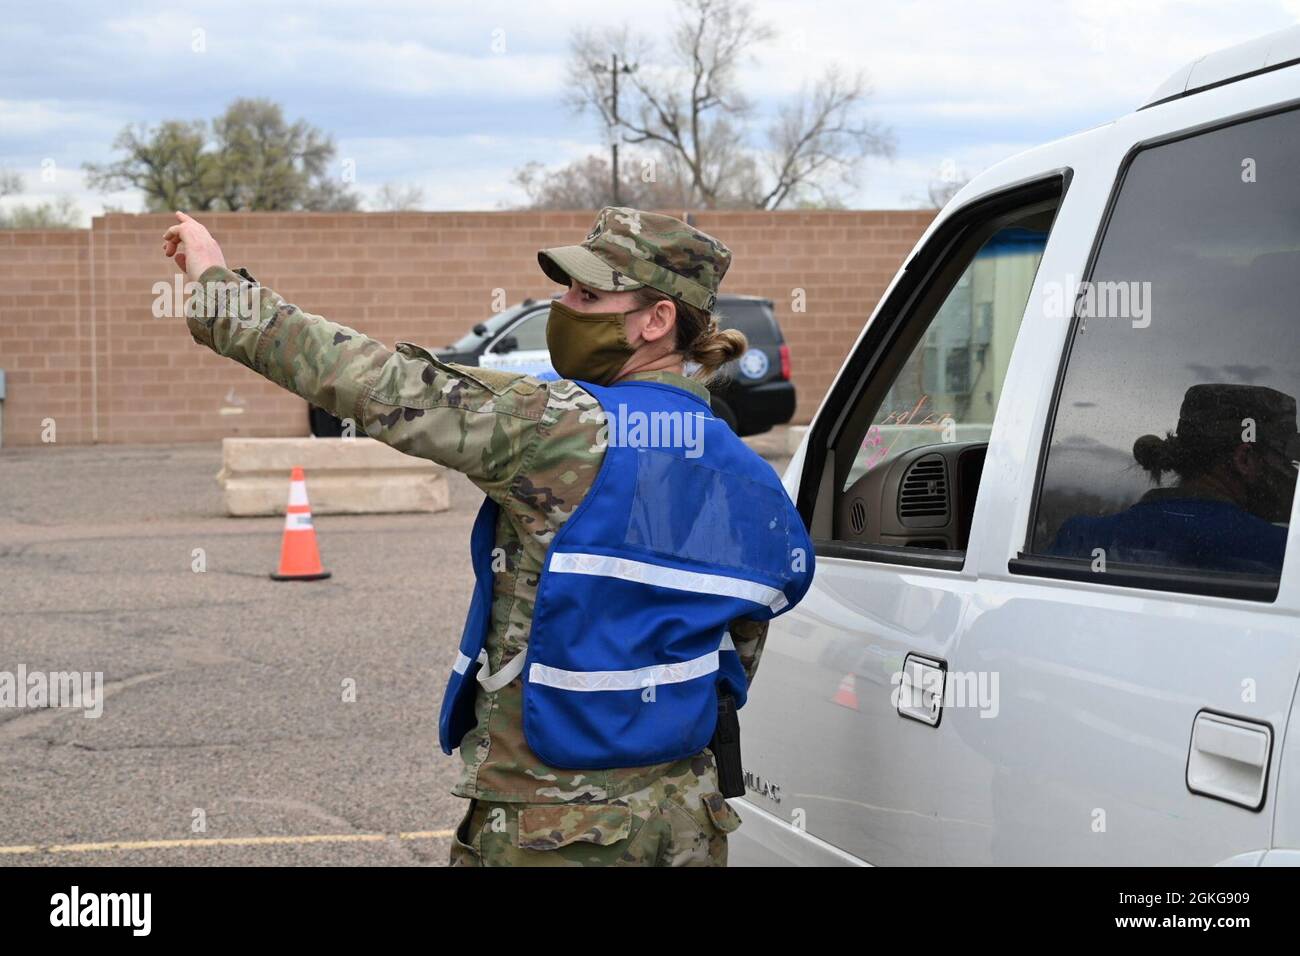 U.S. Army Staff Sgt. Teri Chojnacki, a Cross City, Florida native and combat medic, assigned to 1st Battalion, 41st Infantry, directs a vehicle at the drive-up lanes at the Community Vaccination Center in Pueblo, Colorado, April 15, 2021. The drive-up lanes enable community members to acquire their COVID vaccination without having to exit their vehicles. U.S. Northern Command, through U.S. Army North, remains committed to providing continued, flexible Department of Defense support to the Federal Emergency Management Agency as part of the whole-of-government response to COVID-19. Stock Photo